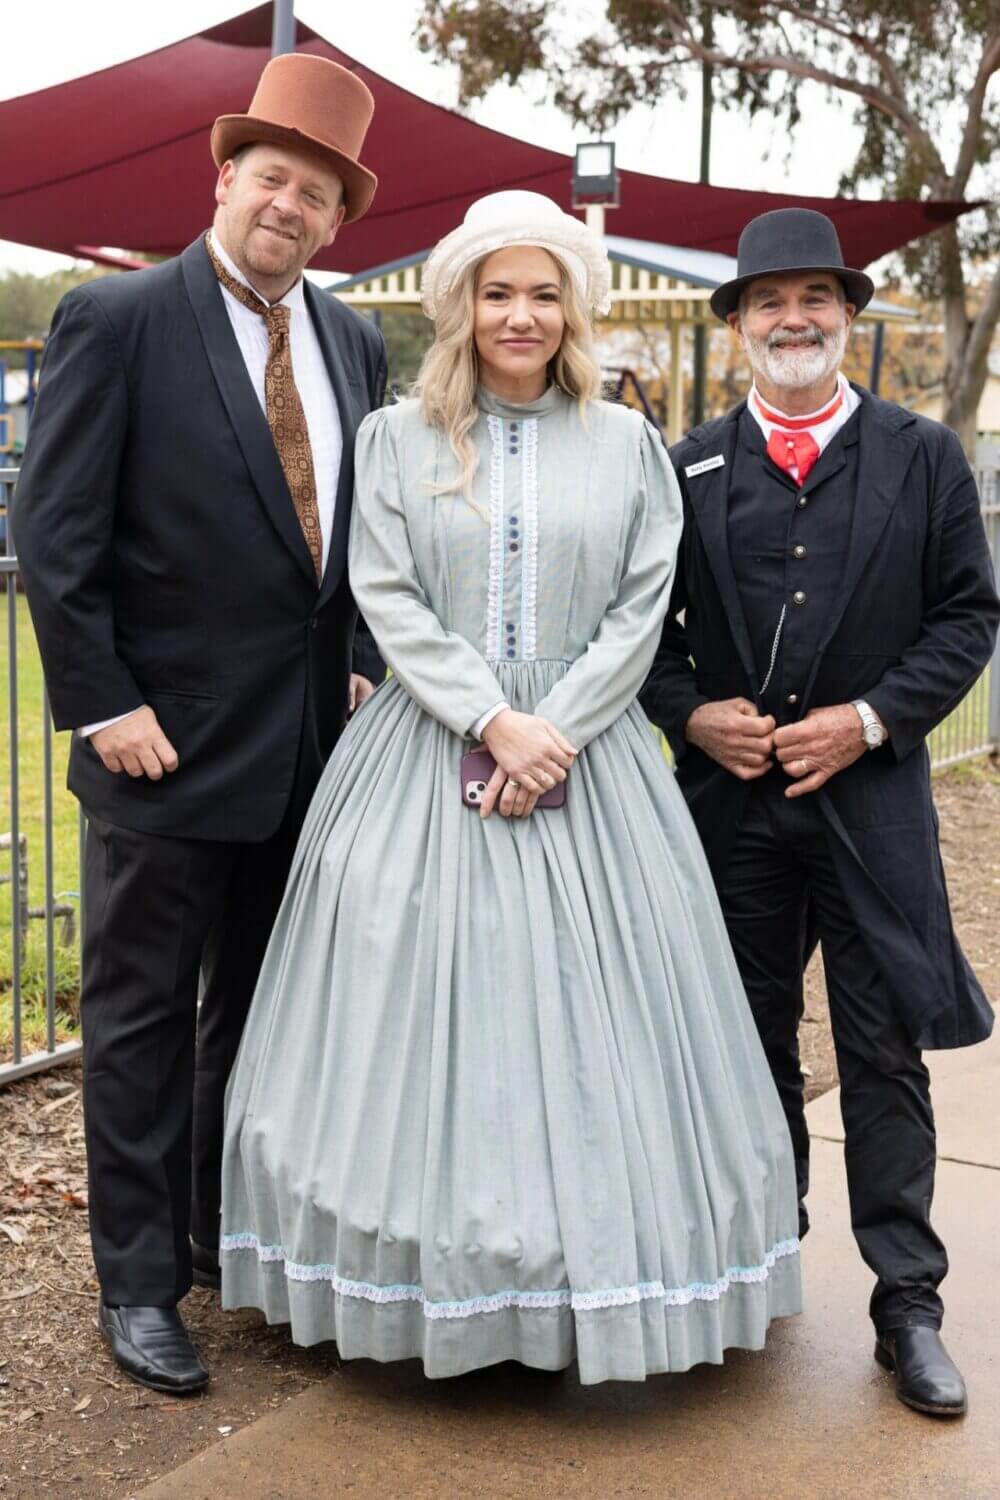 Craig Sutton of Bland Shire Council Bec McDonell of Bland Shire Council and Kerry Keatley Ungarie Advancement Group President in their attire for the reenactment of ‘Blue Cap’ the Bolagamy Bushranger.